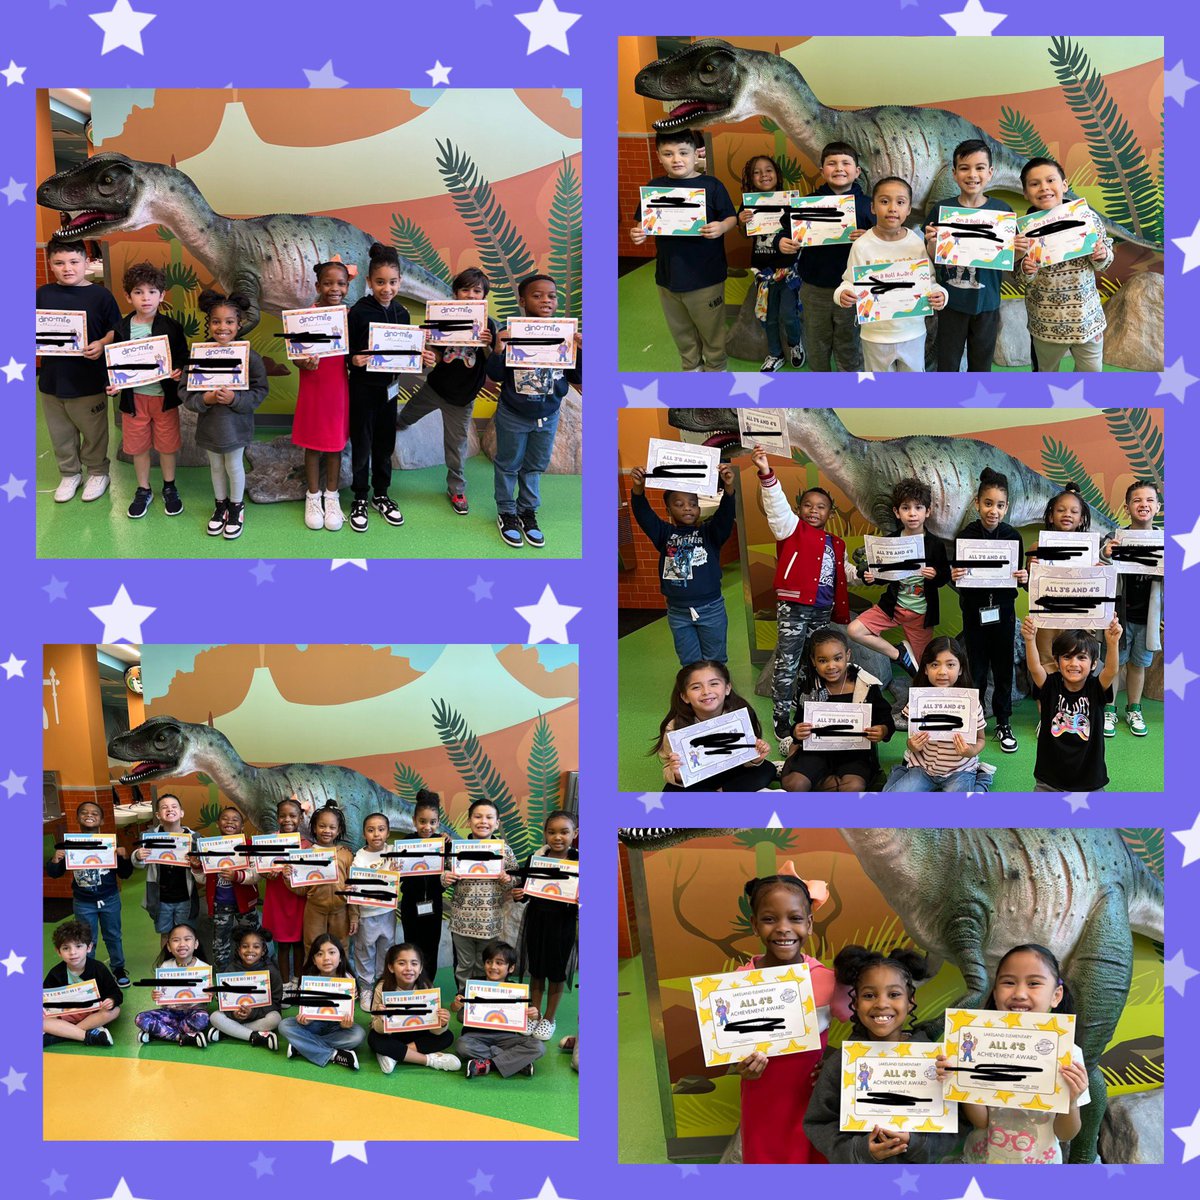 My teacher heart is beaming #WildcatProud today as we celebrate my #FabulousFirsties and the amazing things they have accomplished during the 3rd 9 Weeks! #ShineALight #SendItOn @HumbleISD @HumbleISD_LLE @cassreescano @MavoAntonietta @cburdick015 @ArmyAg86 @MrsGarcia_LLE